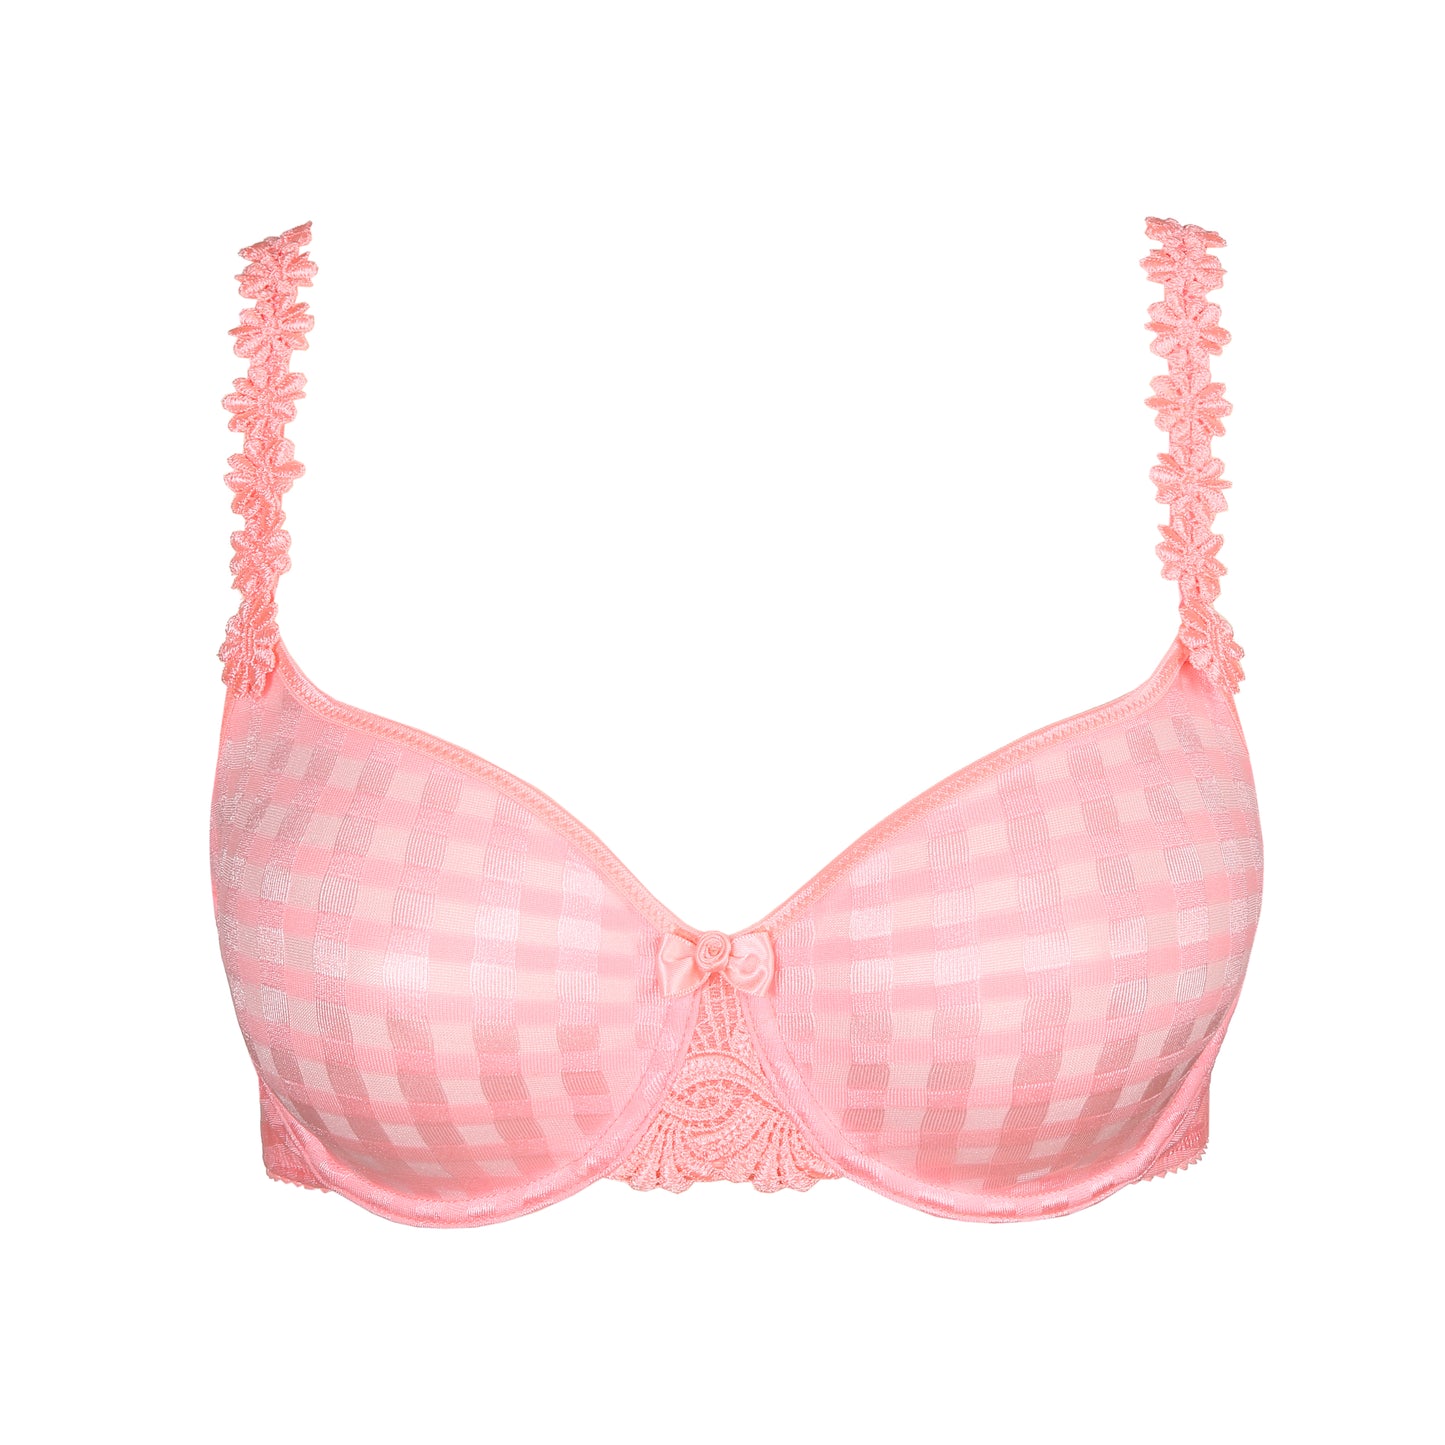 Marie Jo Avero volle cup bh naadloos Pink Parfait